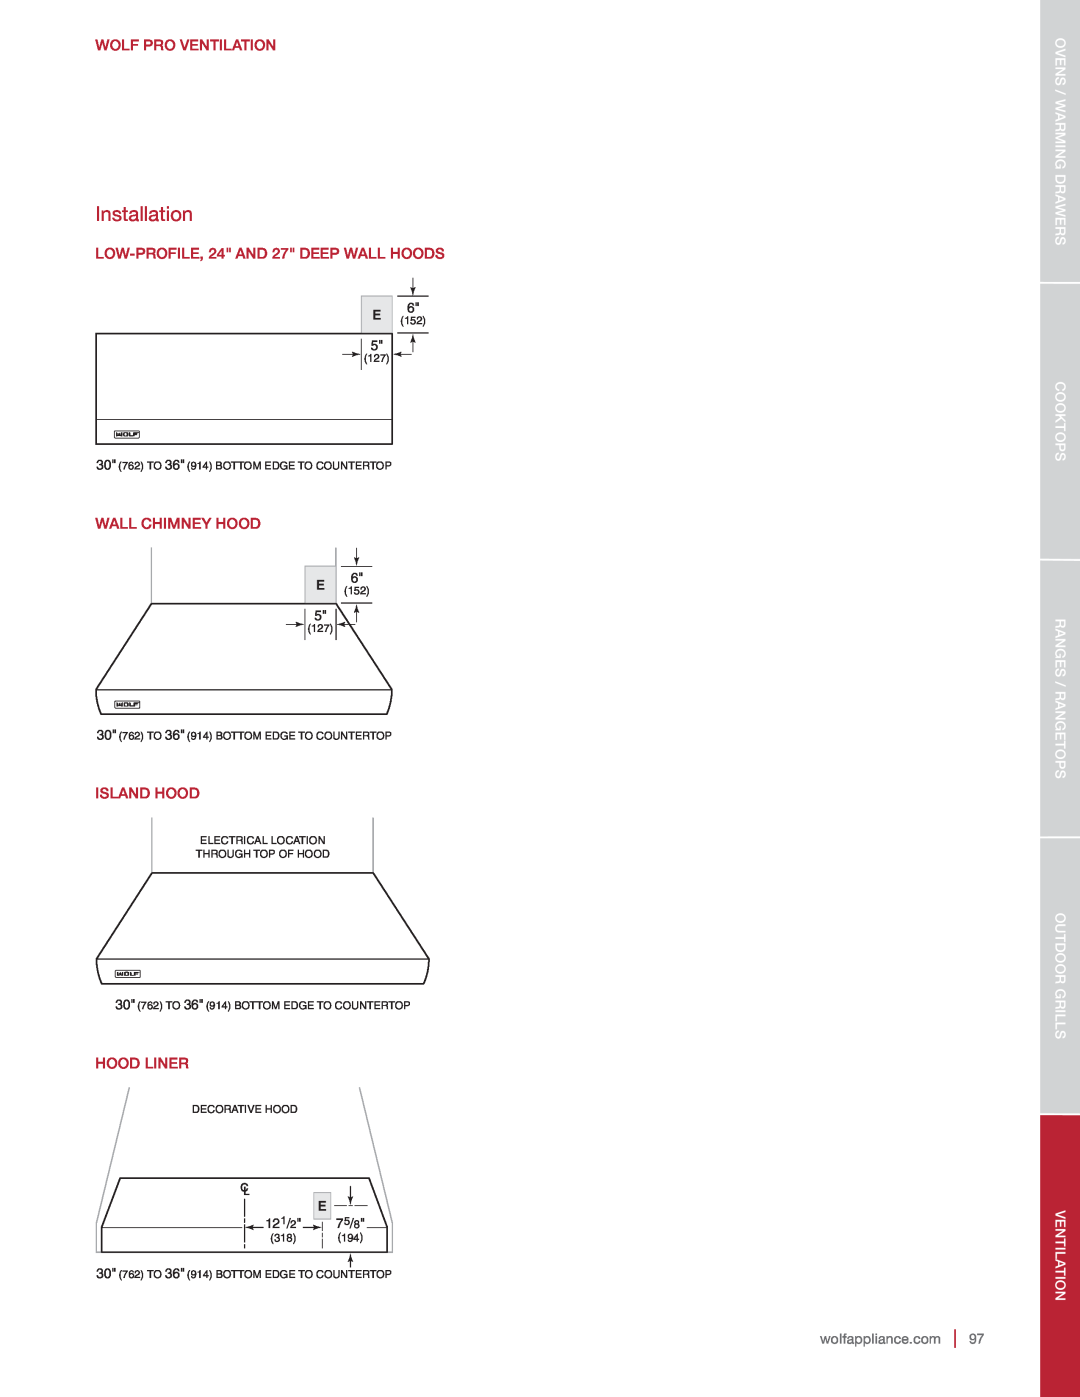 Sub-Zero DO30-2F/S-TH NA Installation, Wolf Pro Ventilation, LOW-PROFILE, 24 AND 27 DEEP WALL HOODS, Wall Chimney Hood 